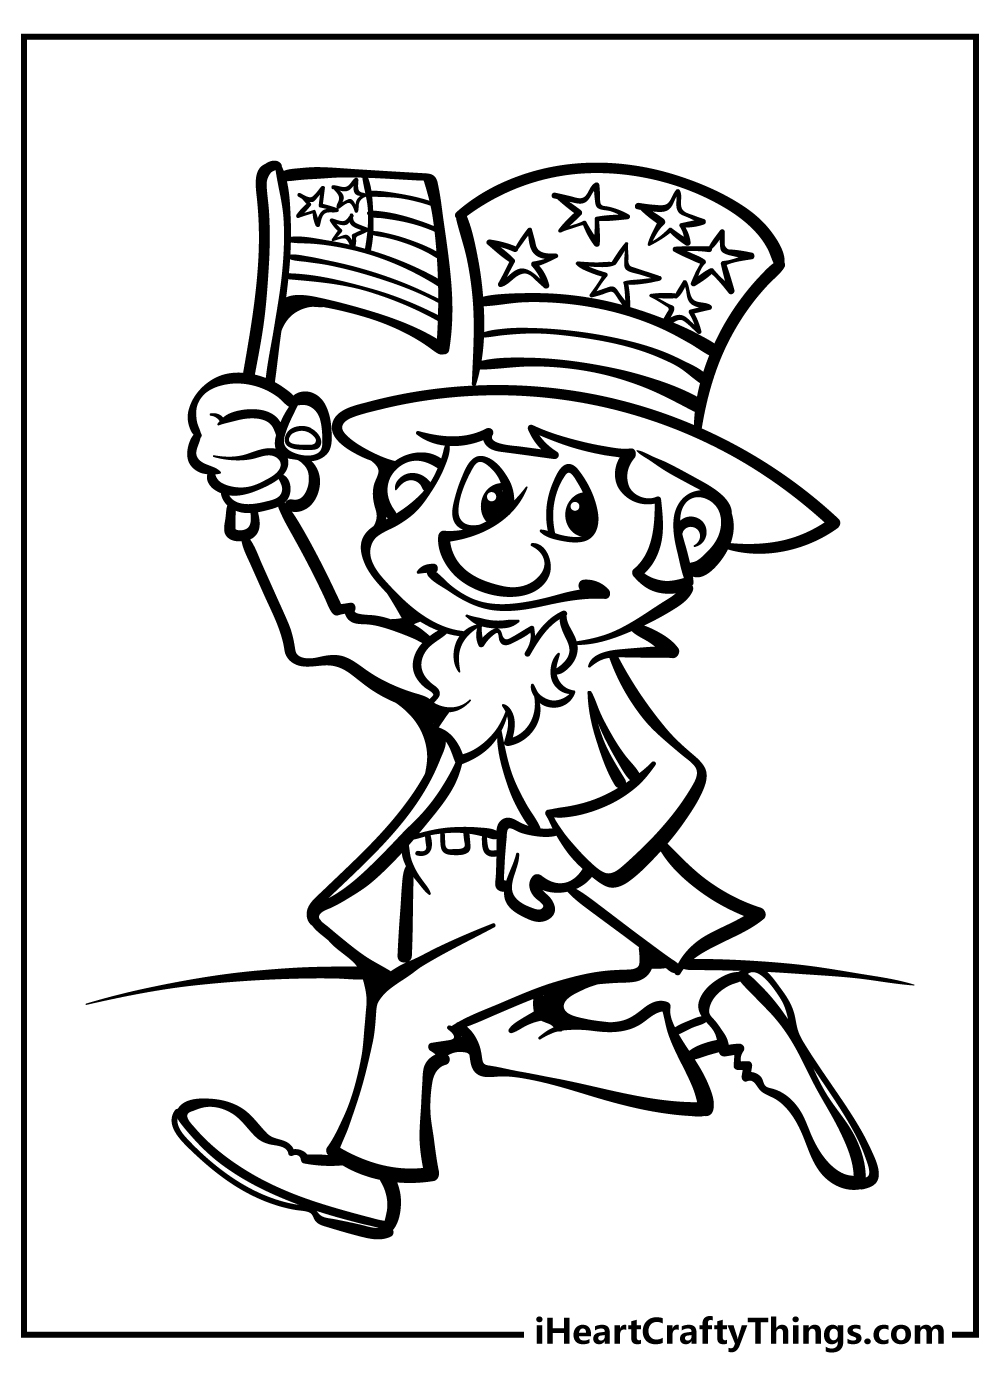 Th of july coloring pages free printables